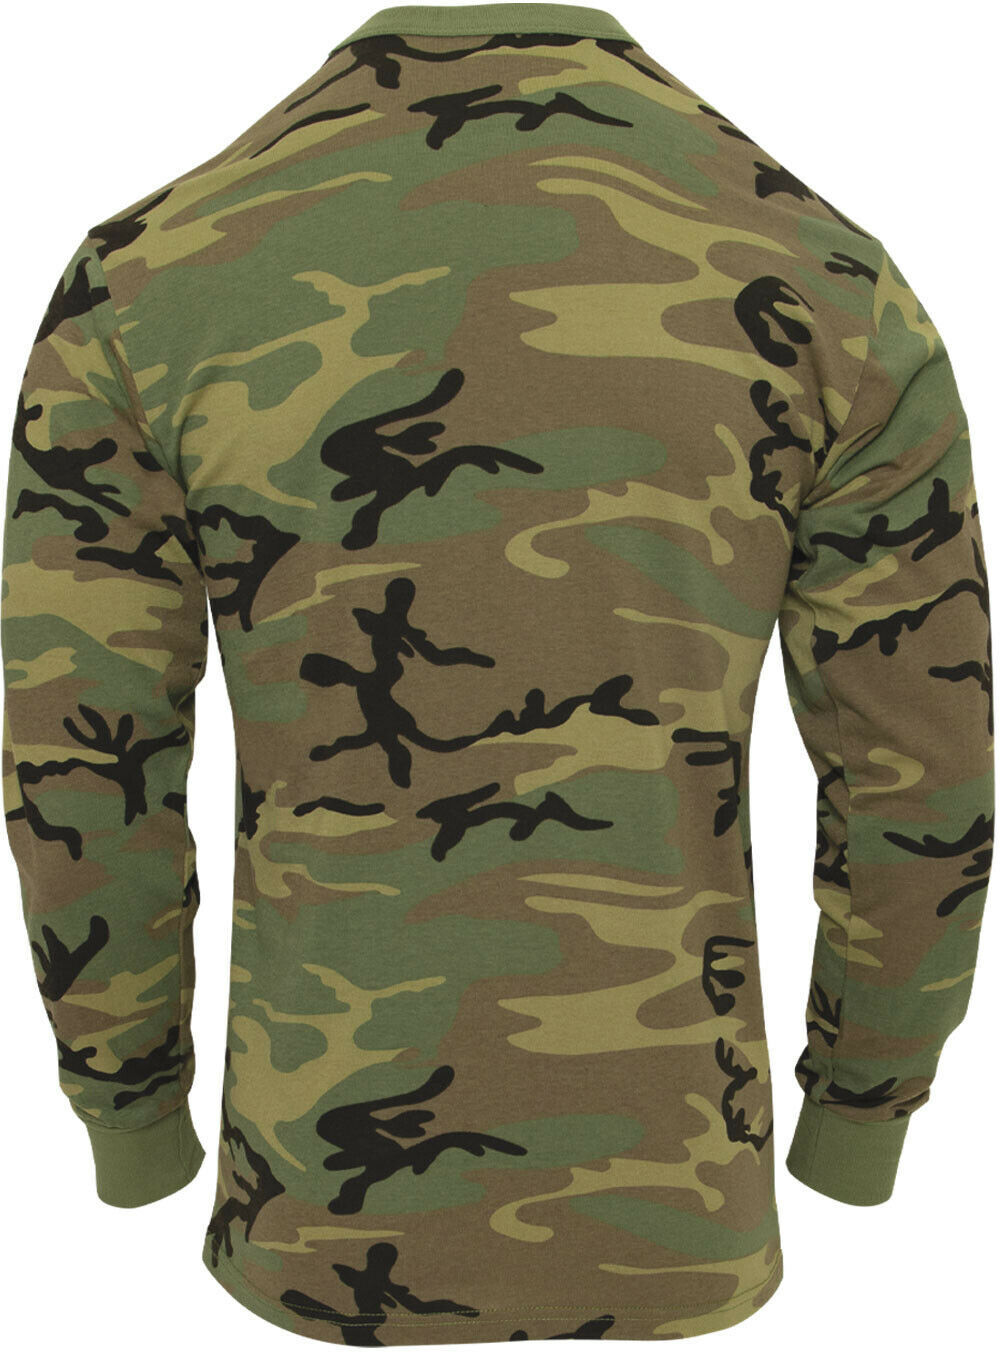 Camo Long Sleeve T-Shirt Washed Vintage Look Tactical Woodland ...